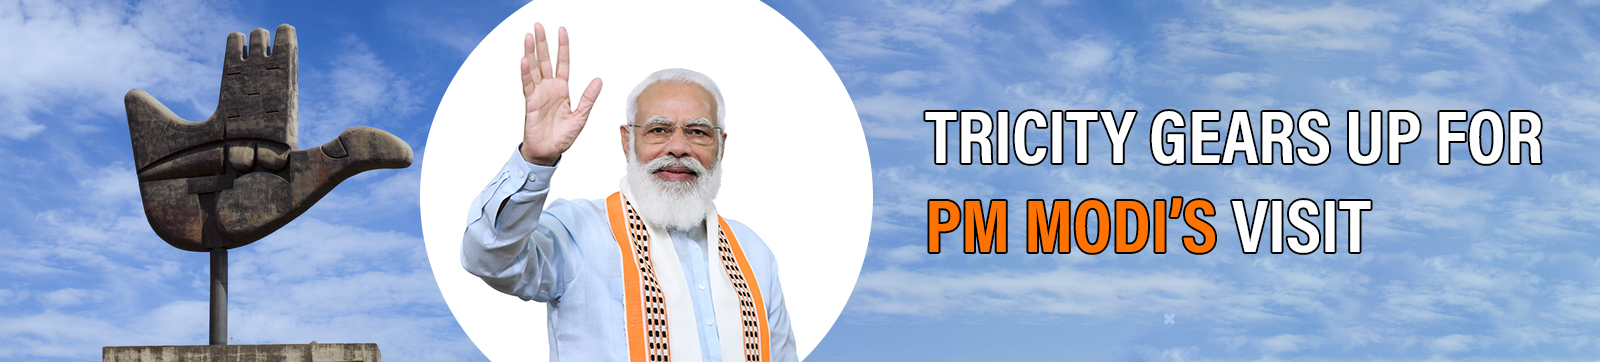 Tricity Gears Up for PM Modi’s Visit